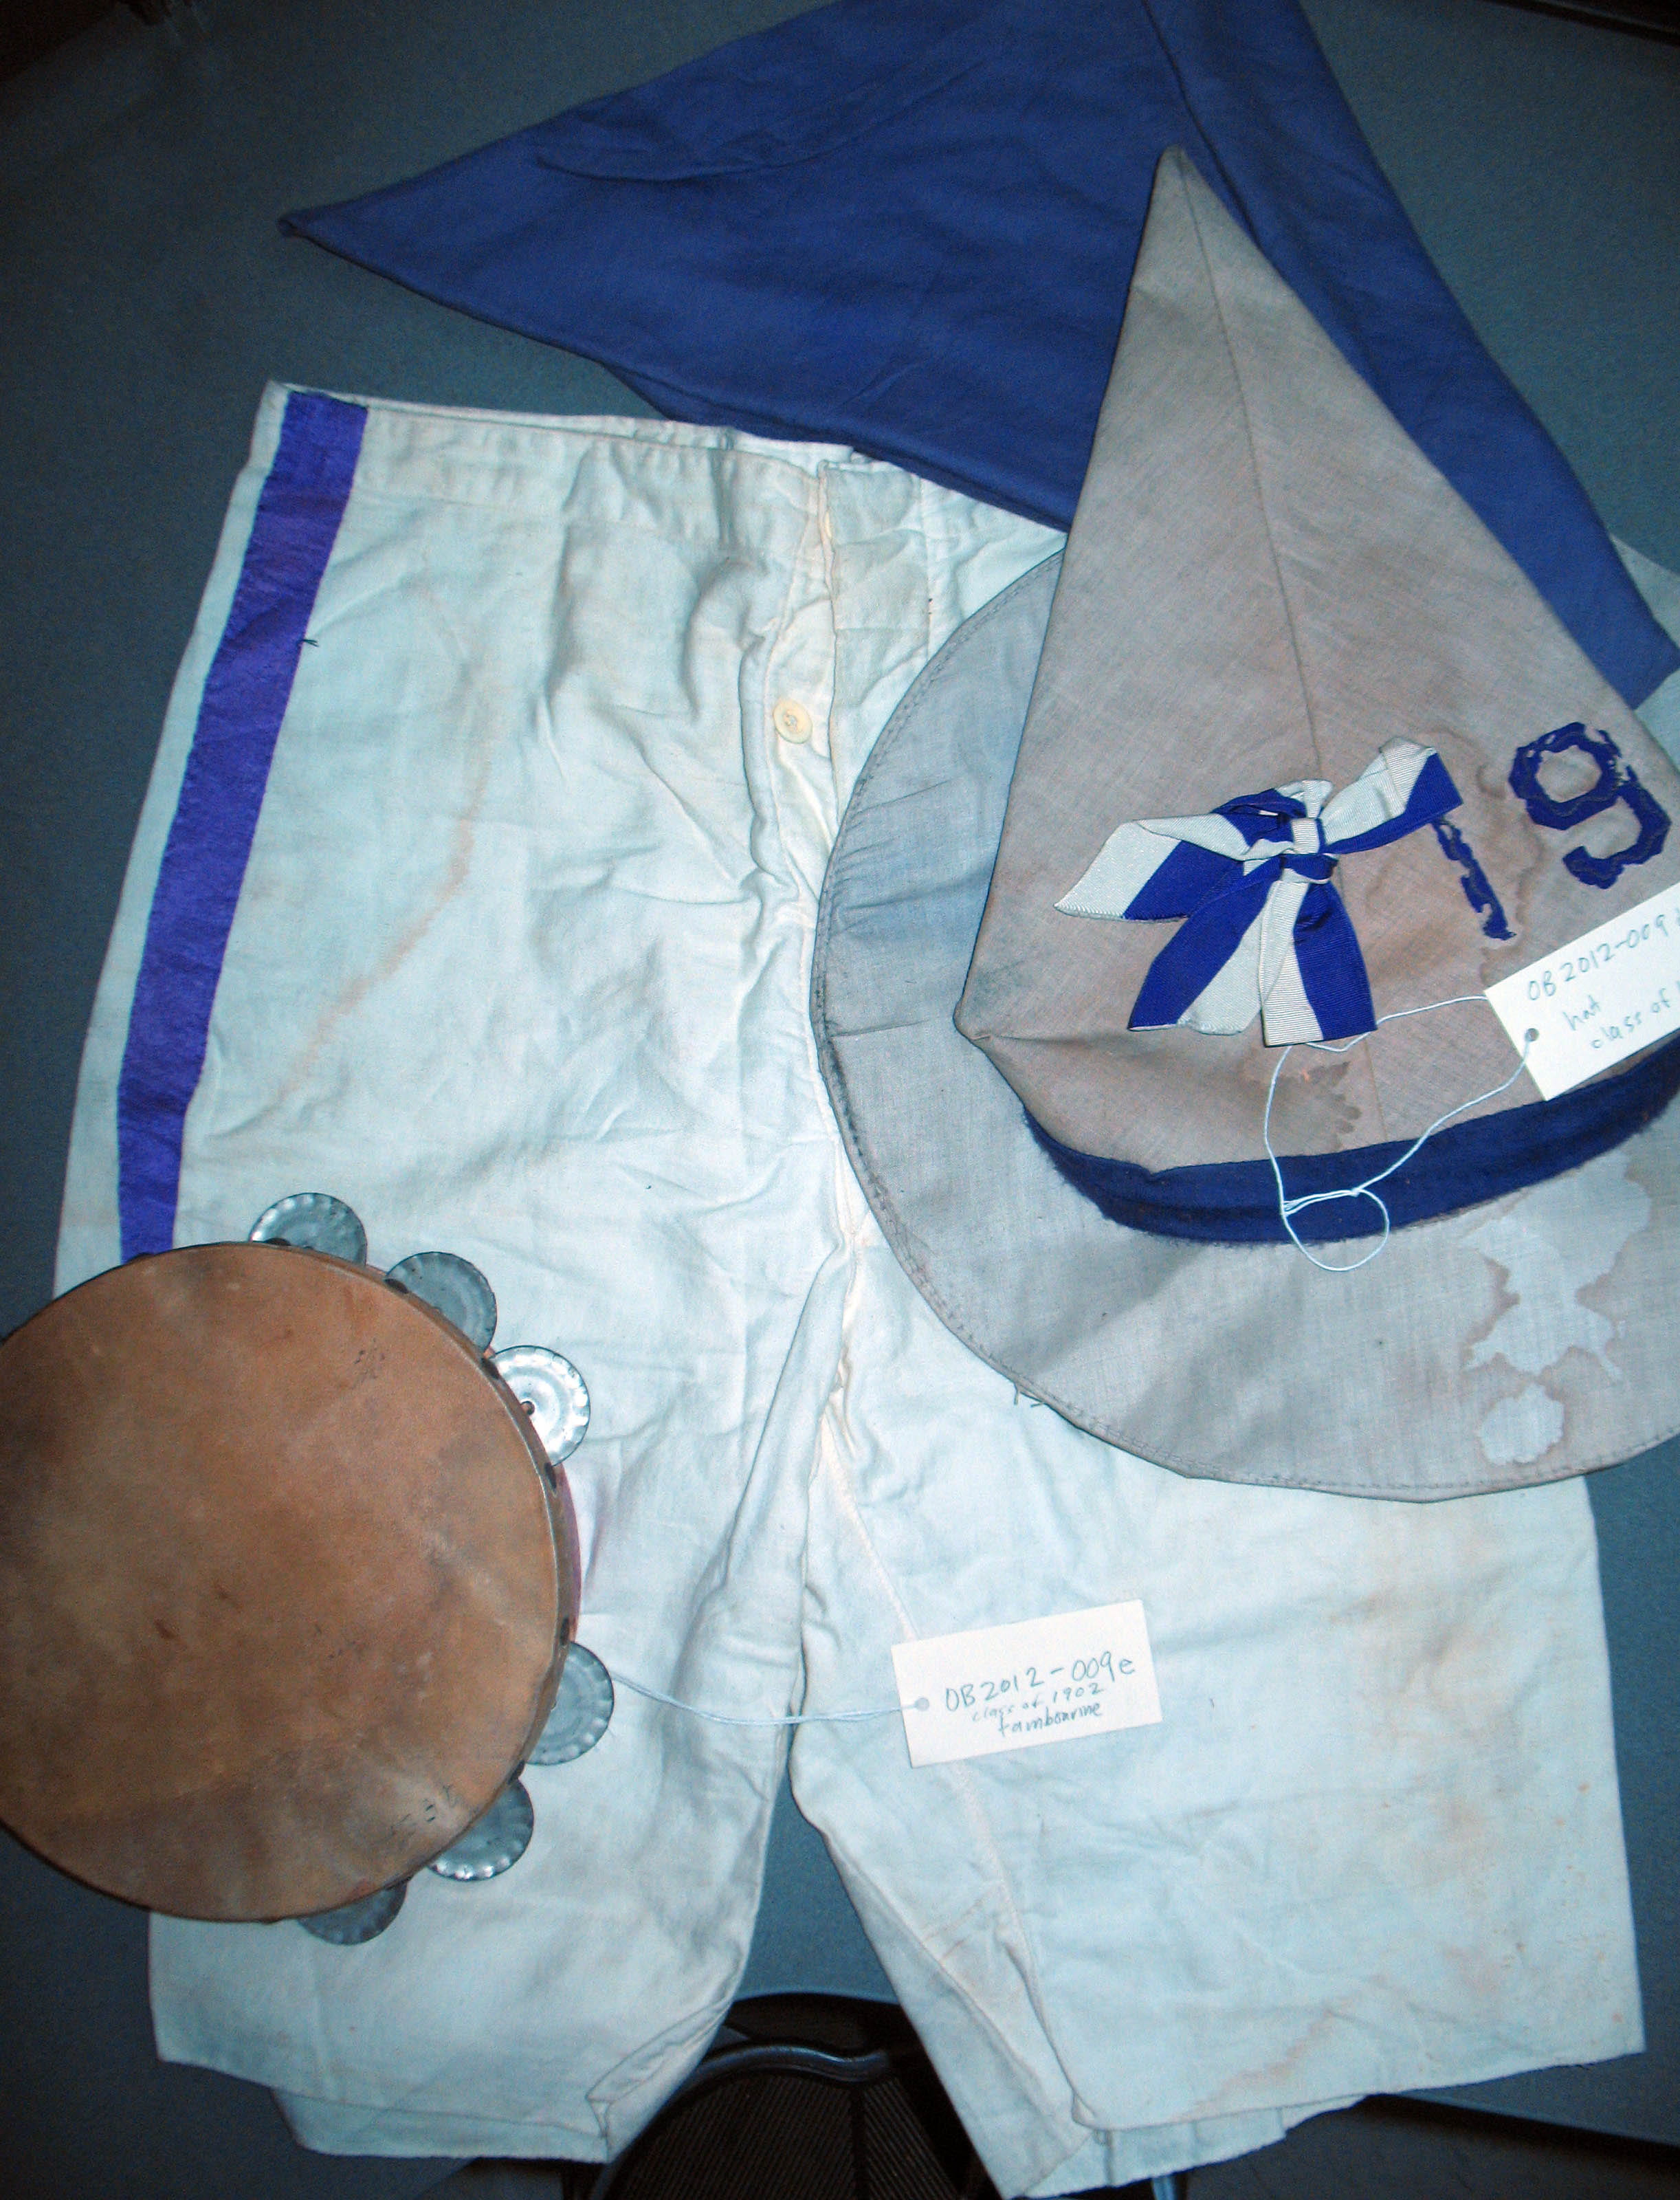 Portion of a Yama Yama Man costume used by the Class of 1902 in 1912.